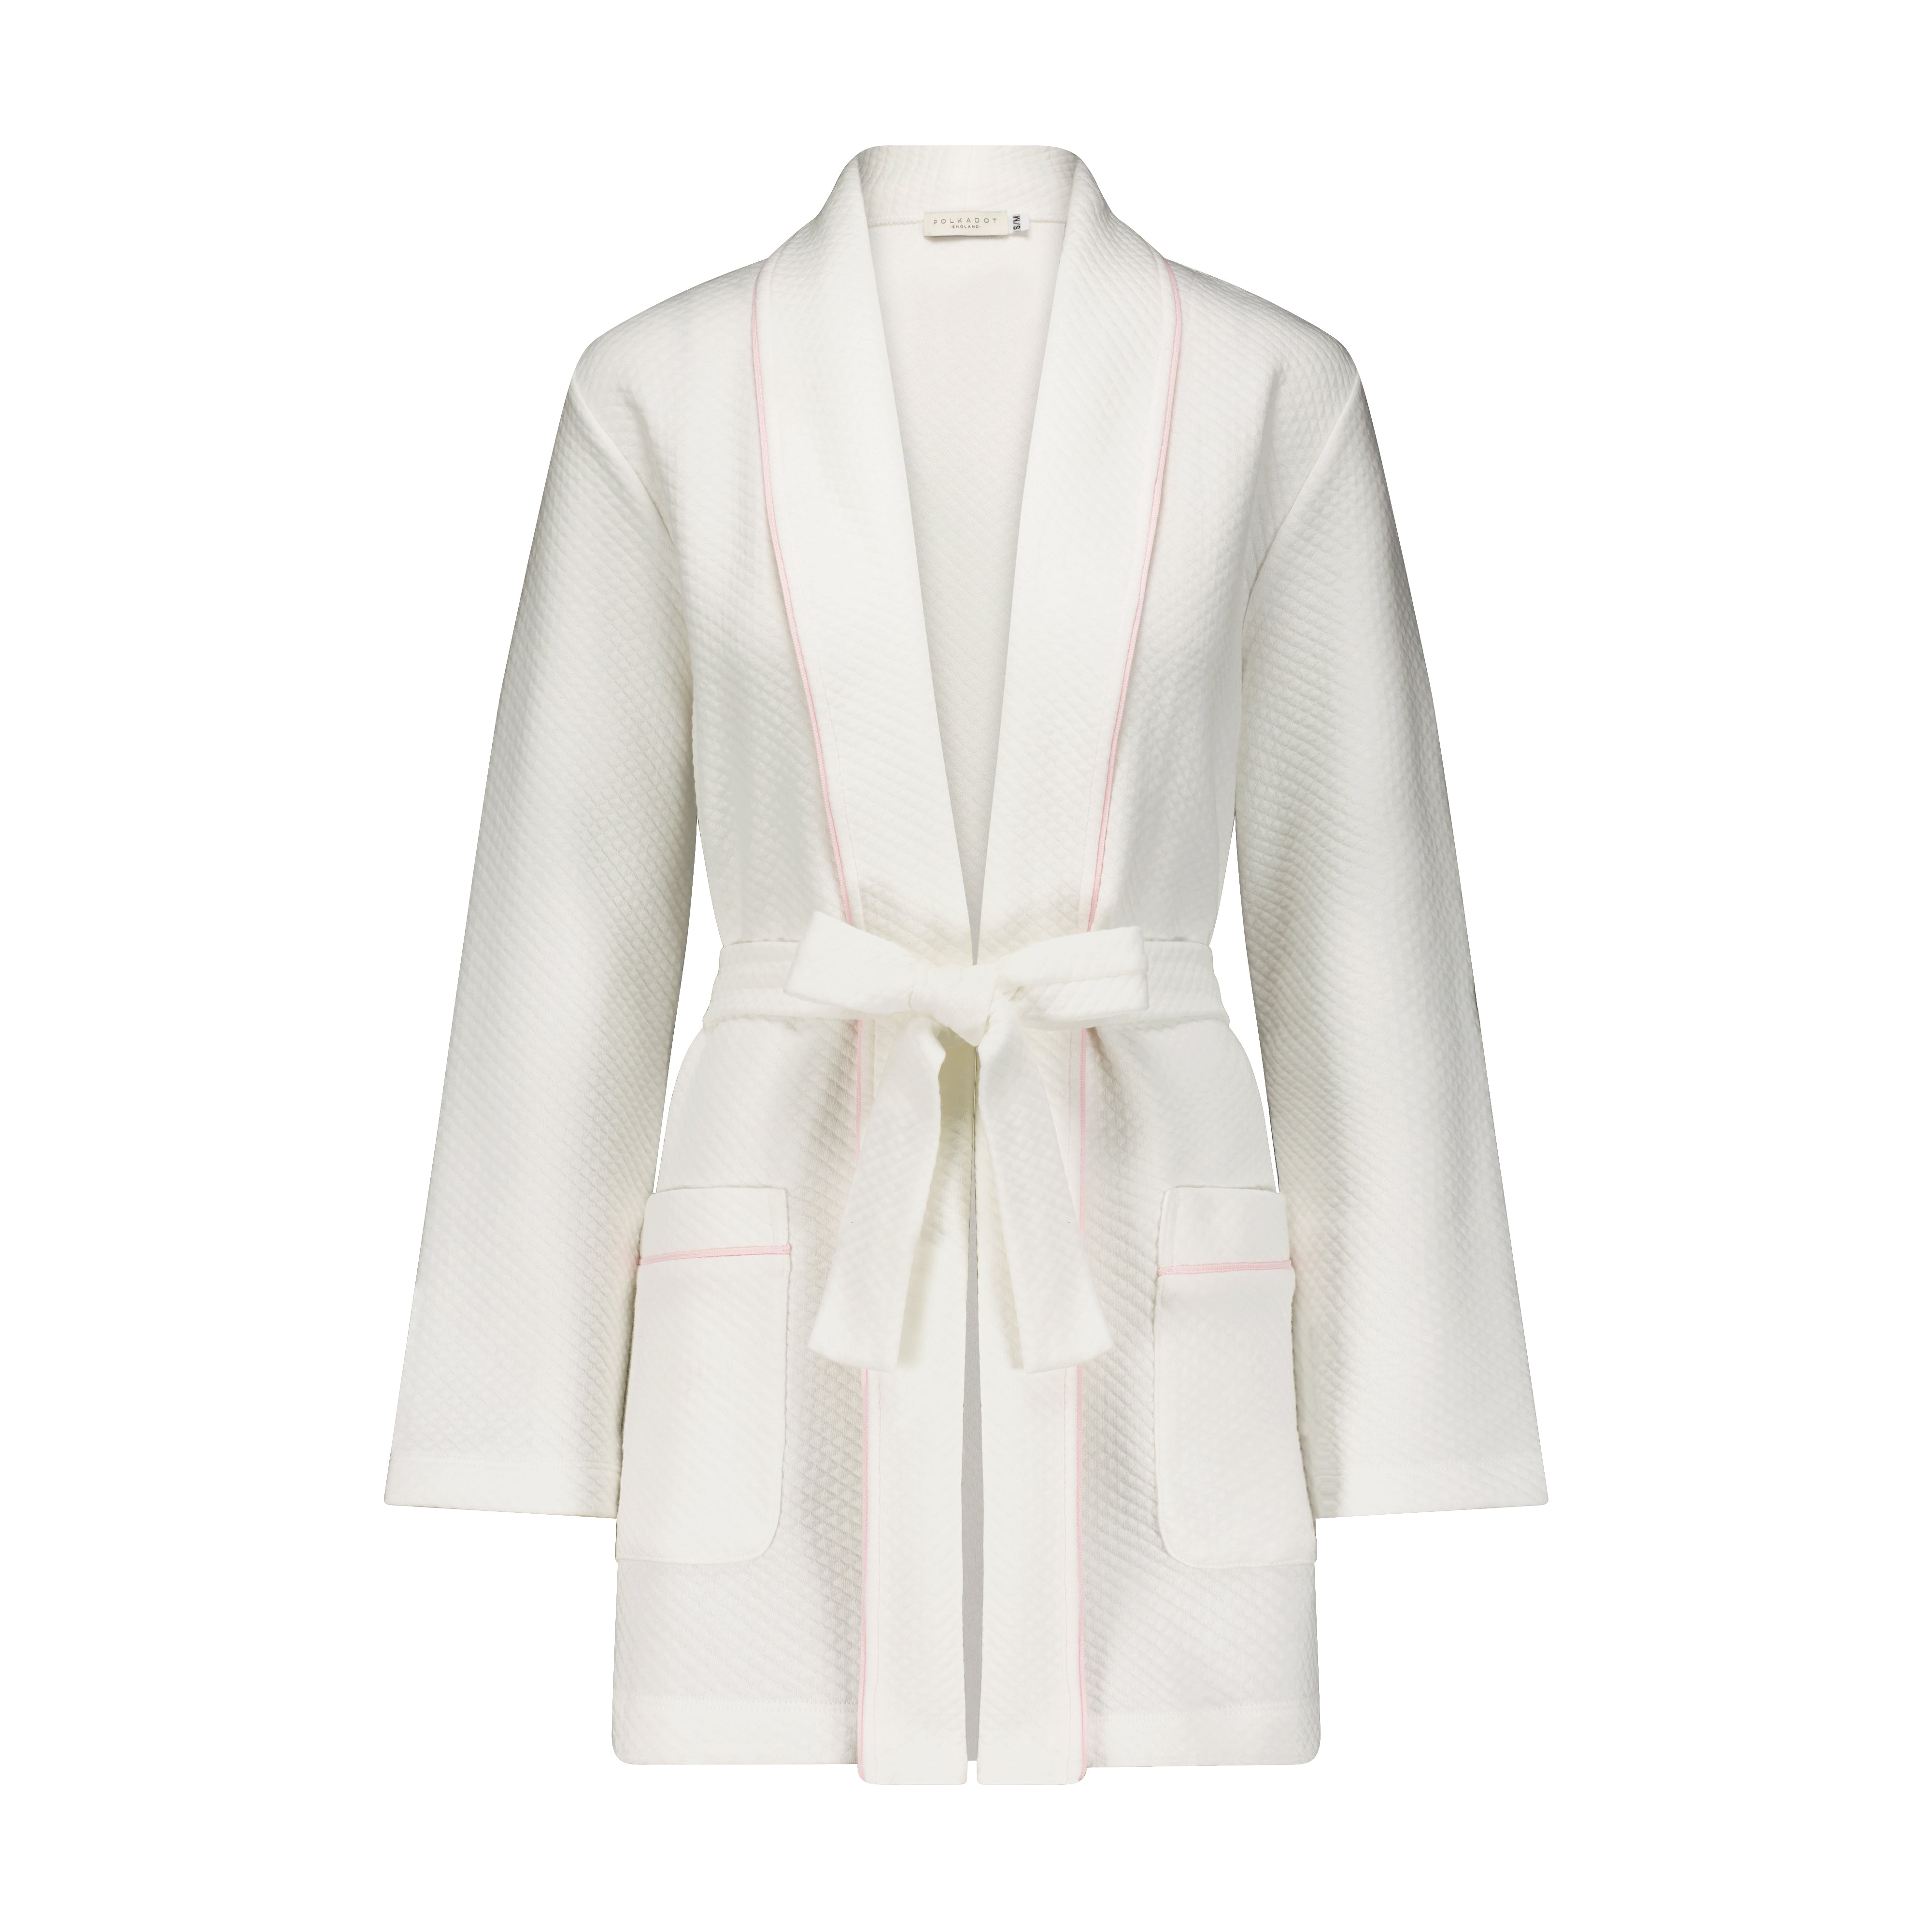 QUILTED SMOKING JACKET /SHORT ROBE White Soft Cotton